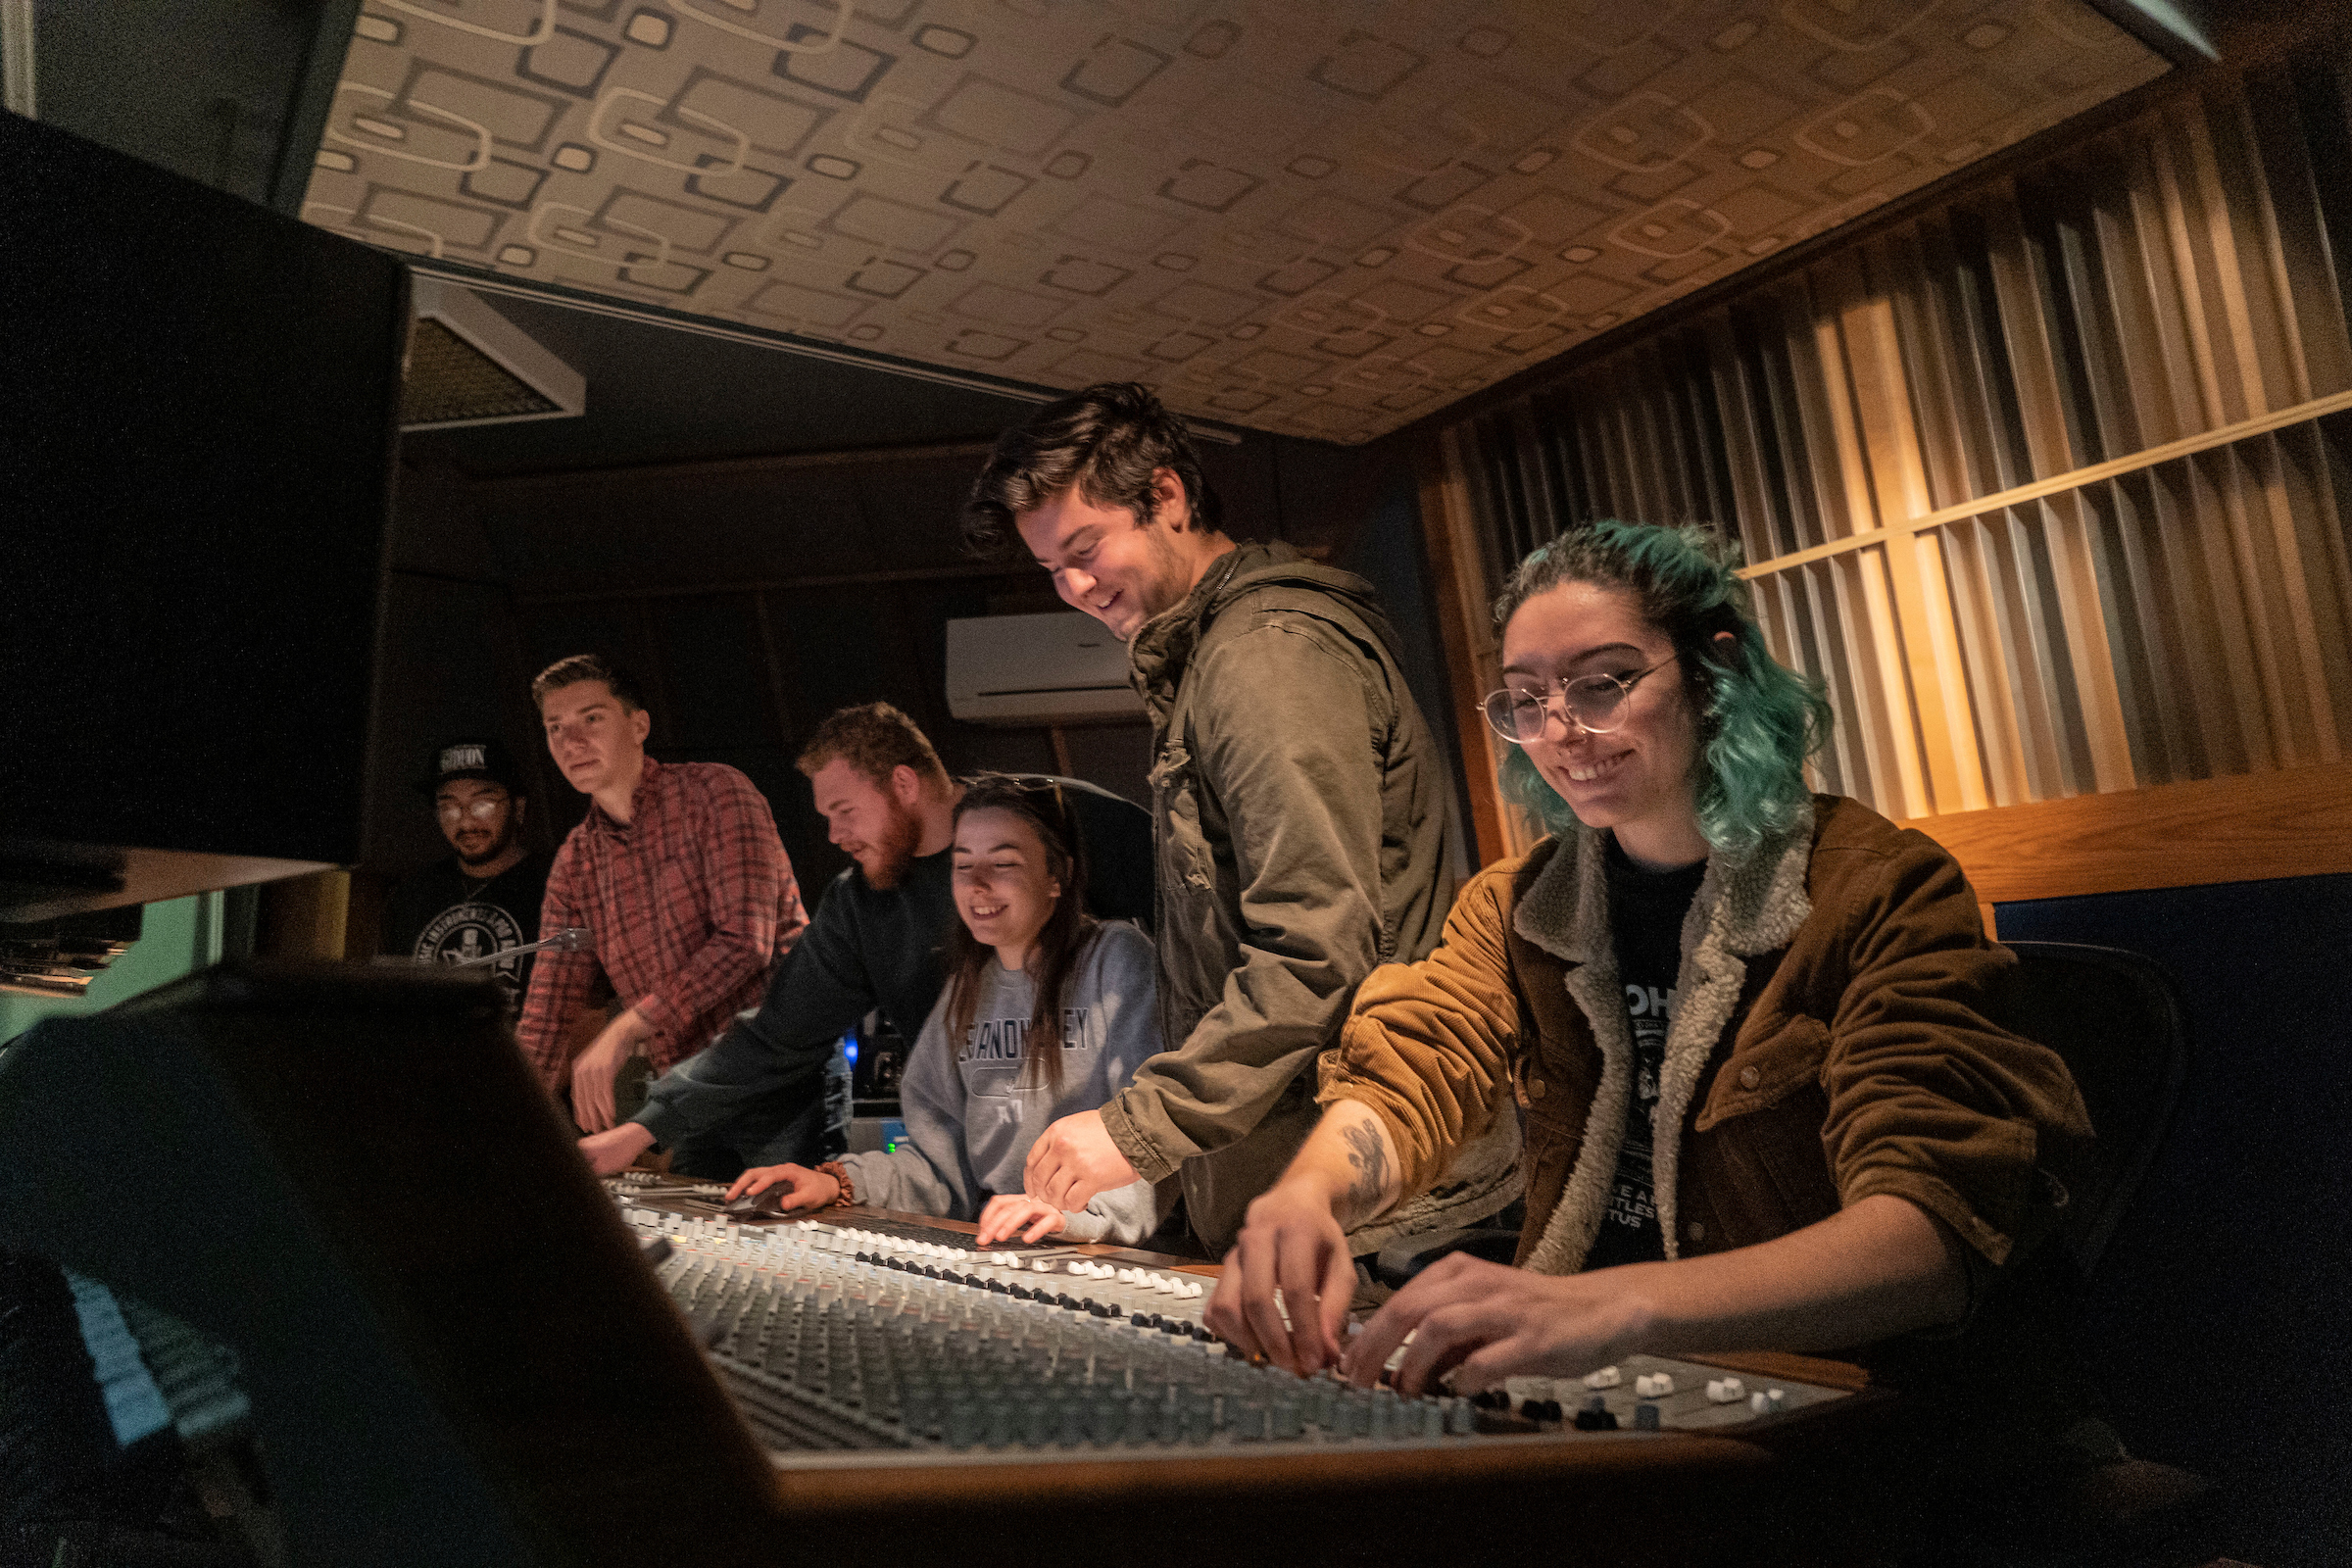 LVC students use recording equipment in Studio A